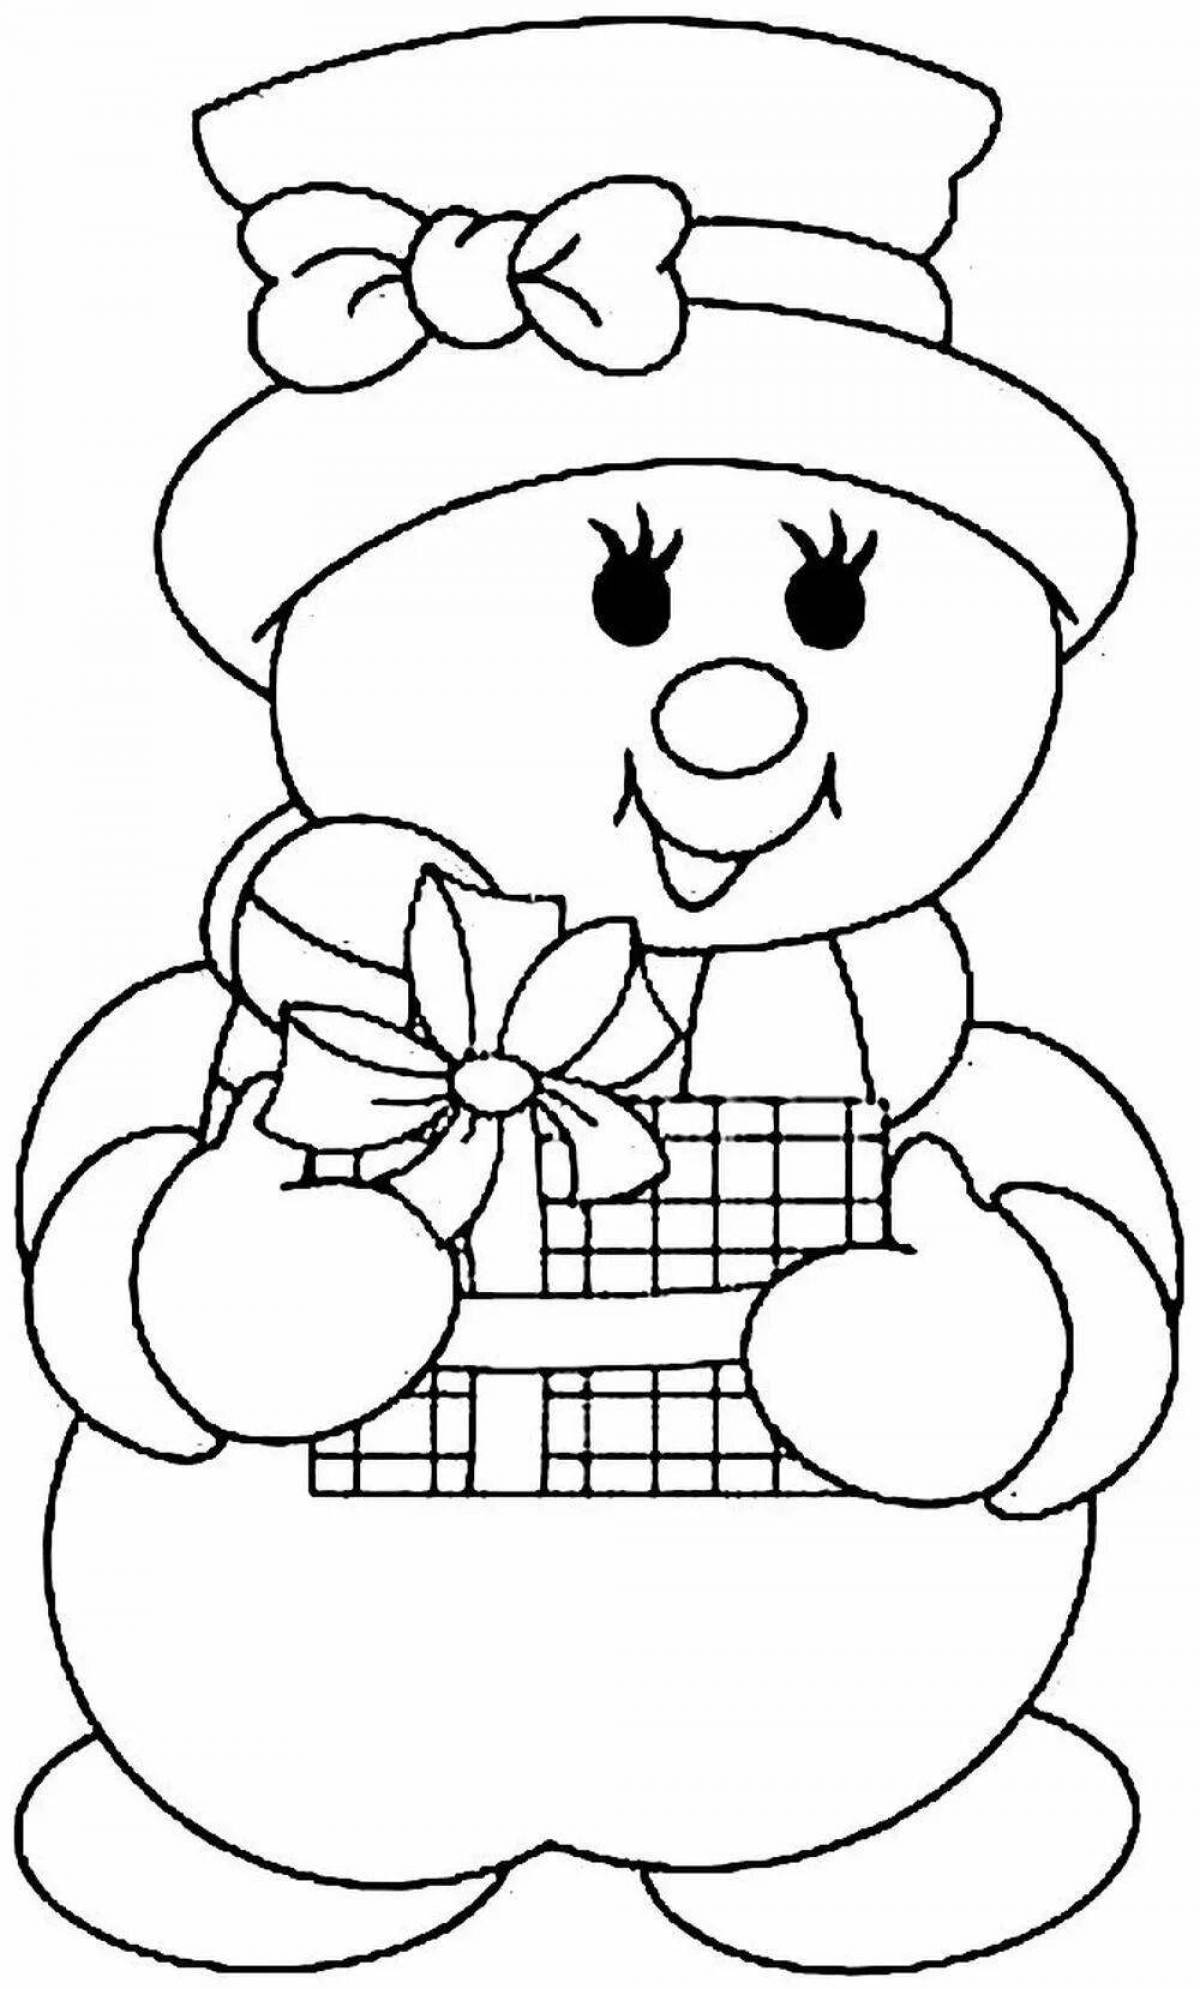 Animated snowman coloring card